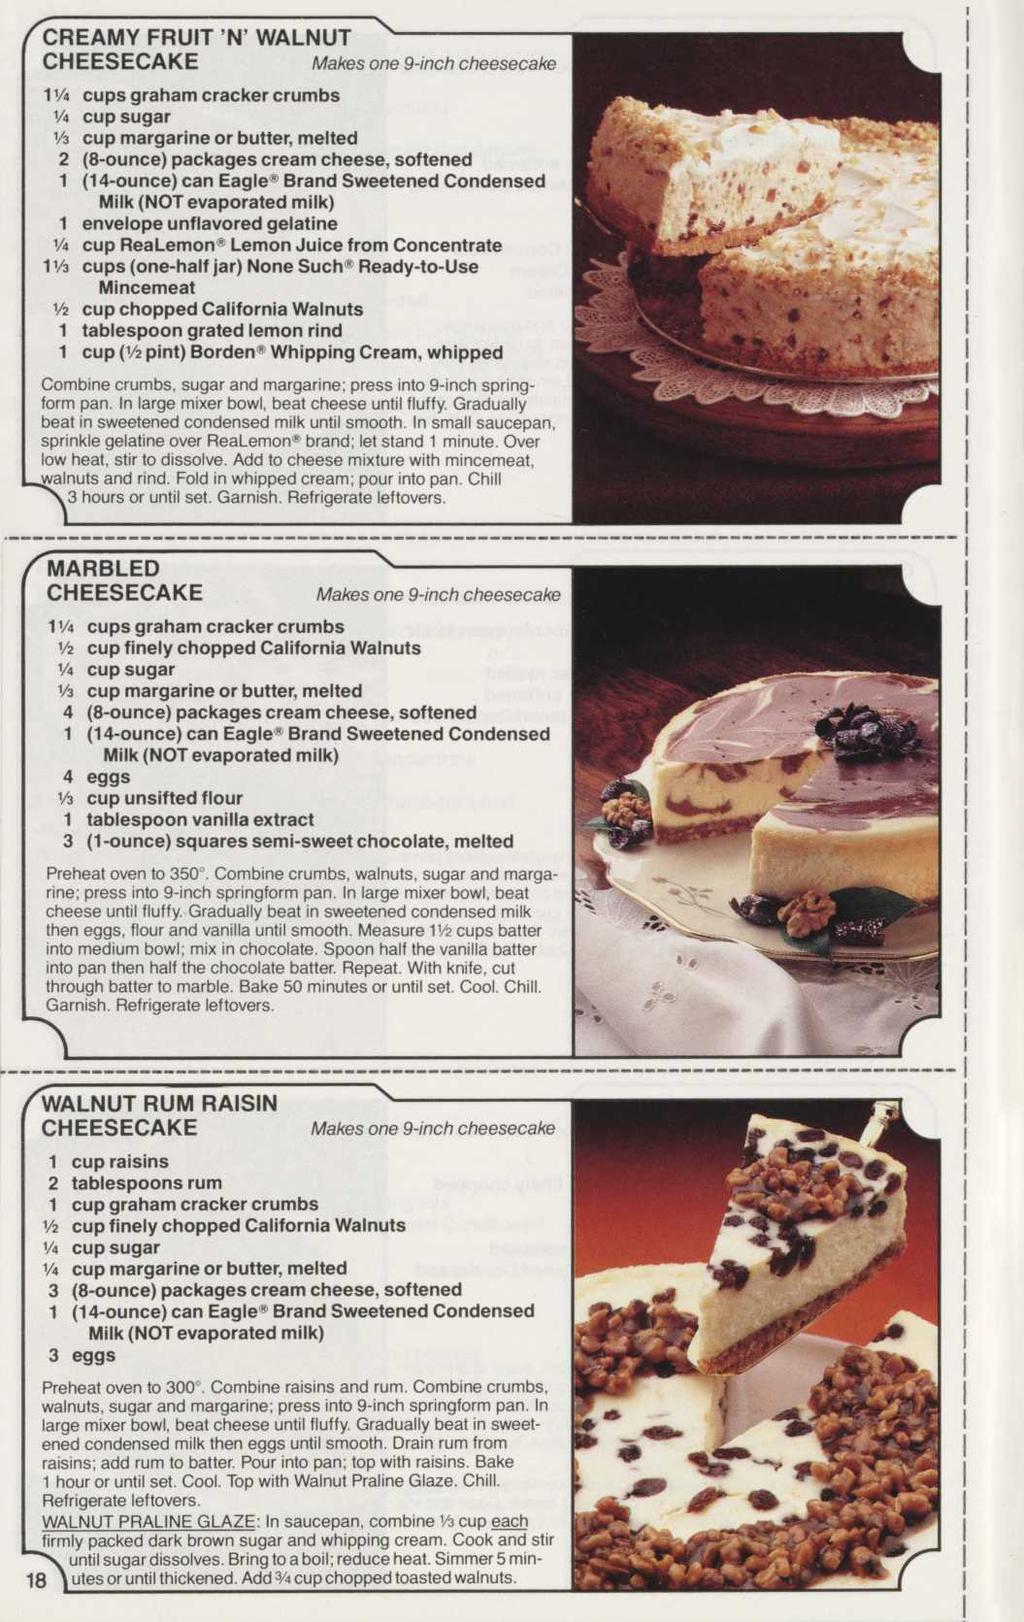 F :REAMY FRUIT N' WALNUT CHEESECAKE Makes one 9-inch cheesecake /4 cups graham cracker crumbs /4 cup sugar /3 cup margarine or butter, melted 2 (8-ounce) packages cream cheese, softened envelope